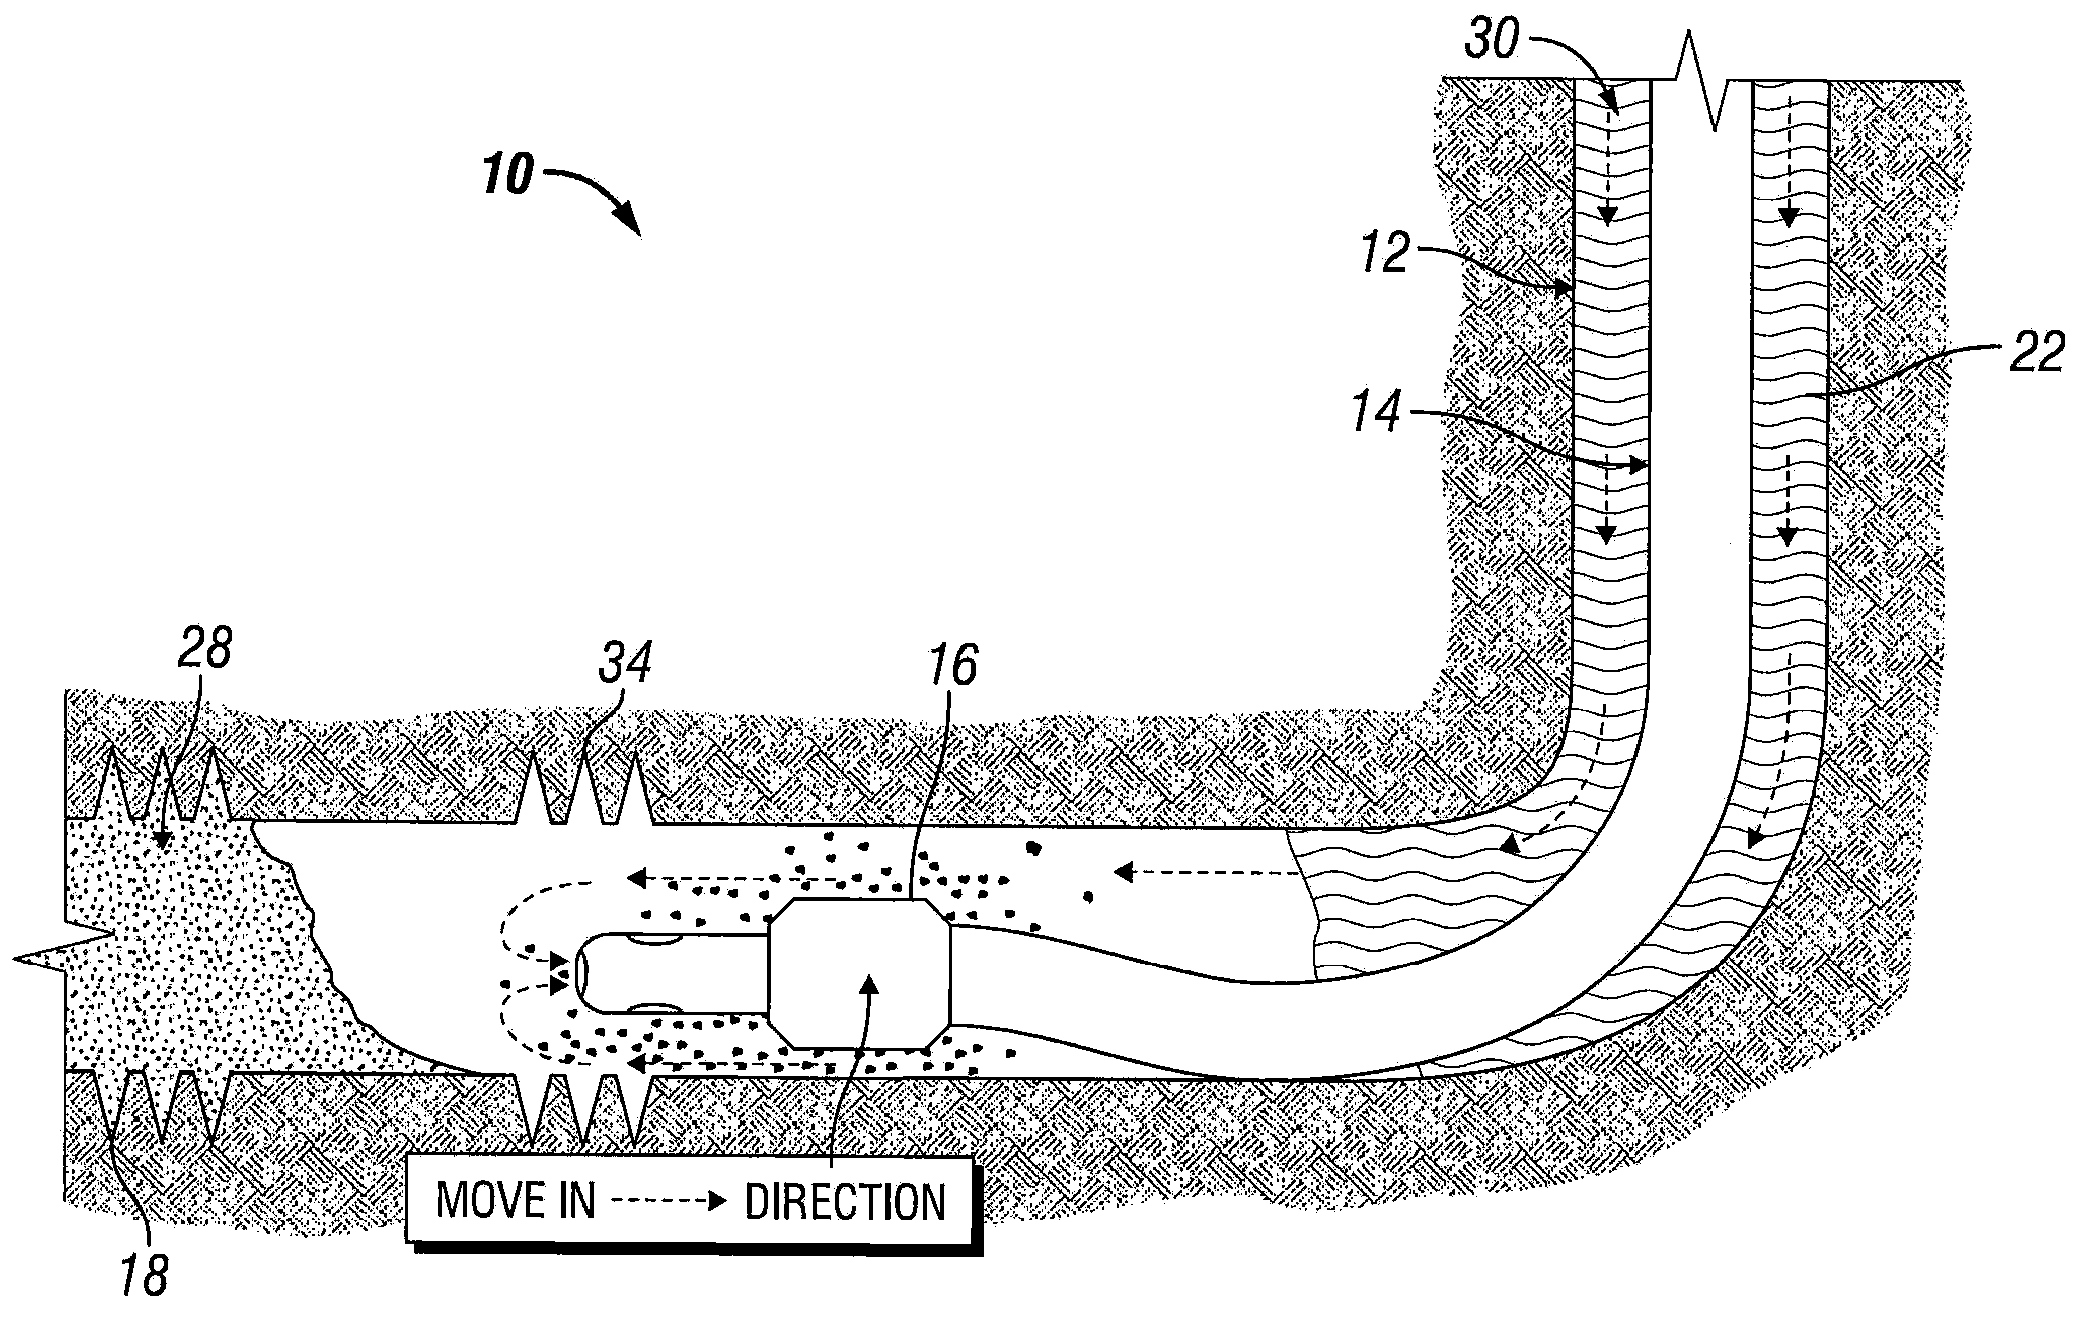 Methods for cleaning out horizontal wellbores using coiled tubing